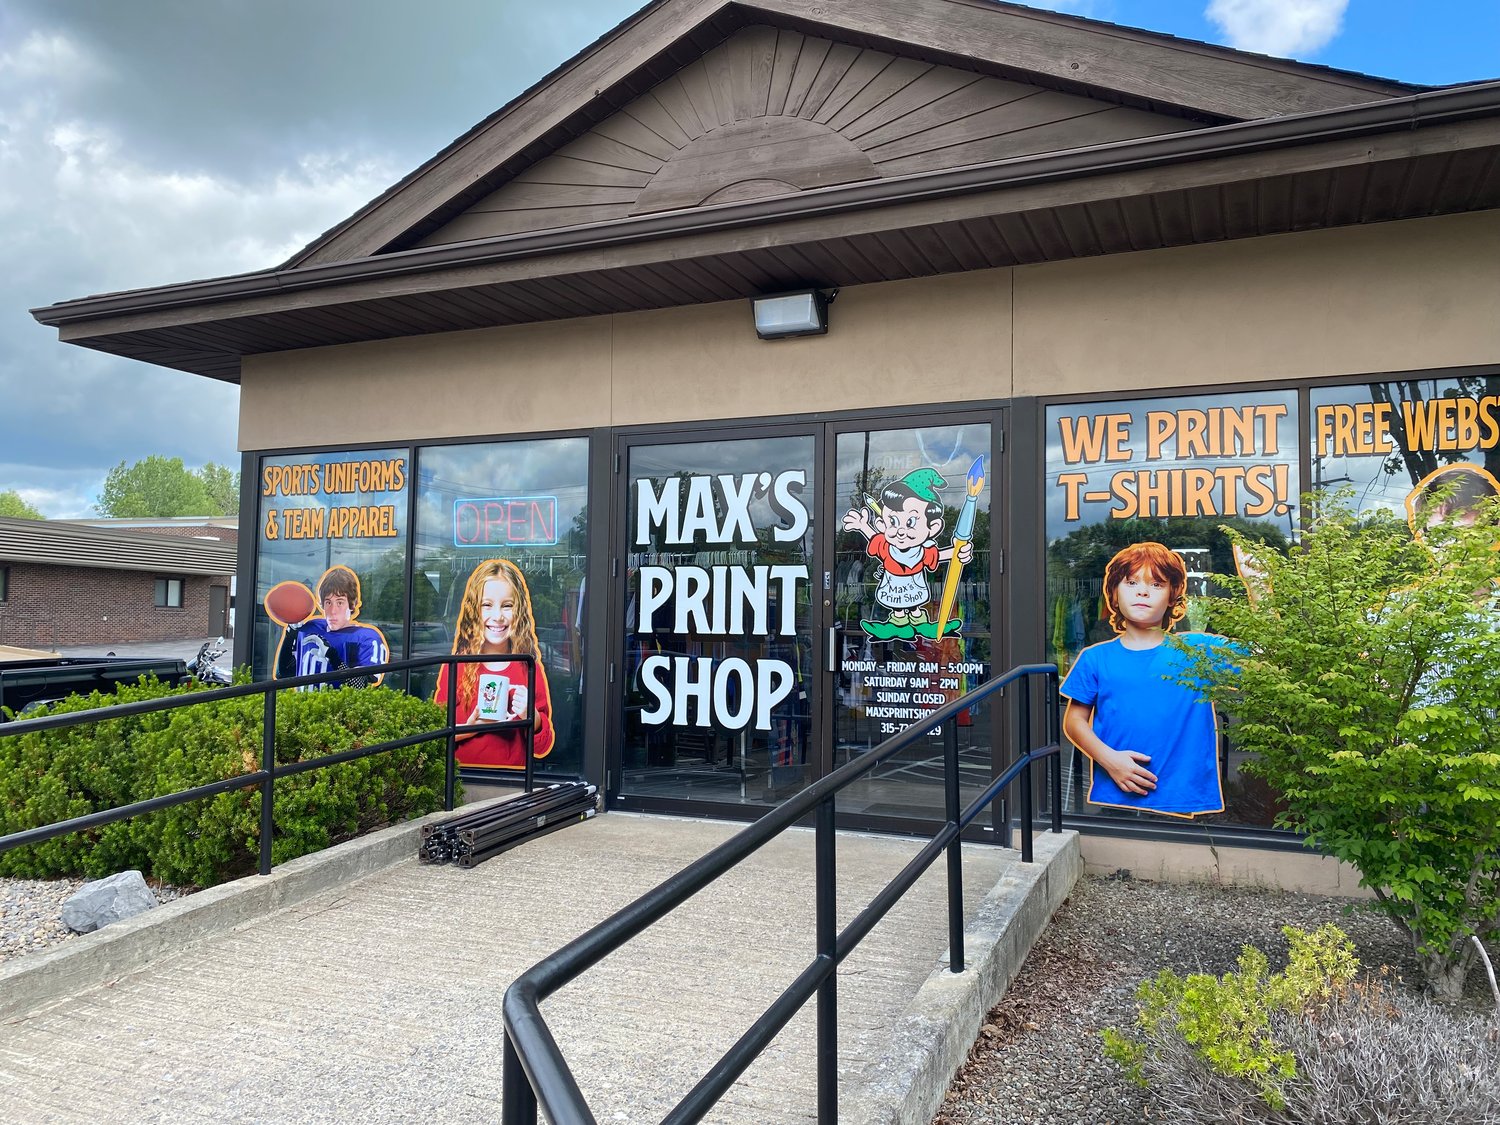 Max’s Print Shop, now located at 9555 River Road in Marcy, held a grand opening of its new site on Friday, featuring a car show, entertainment and a view of its larger facility.